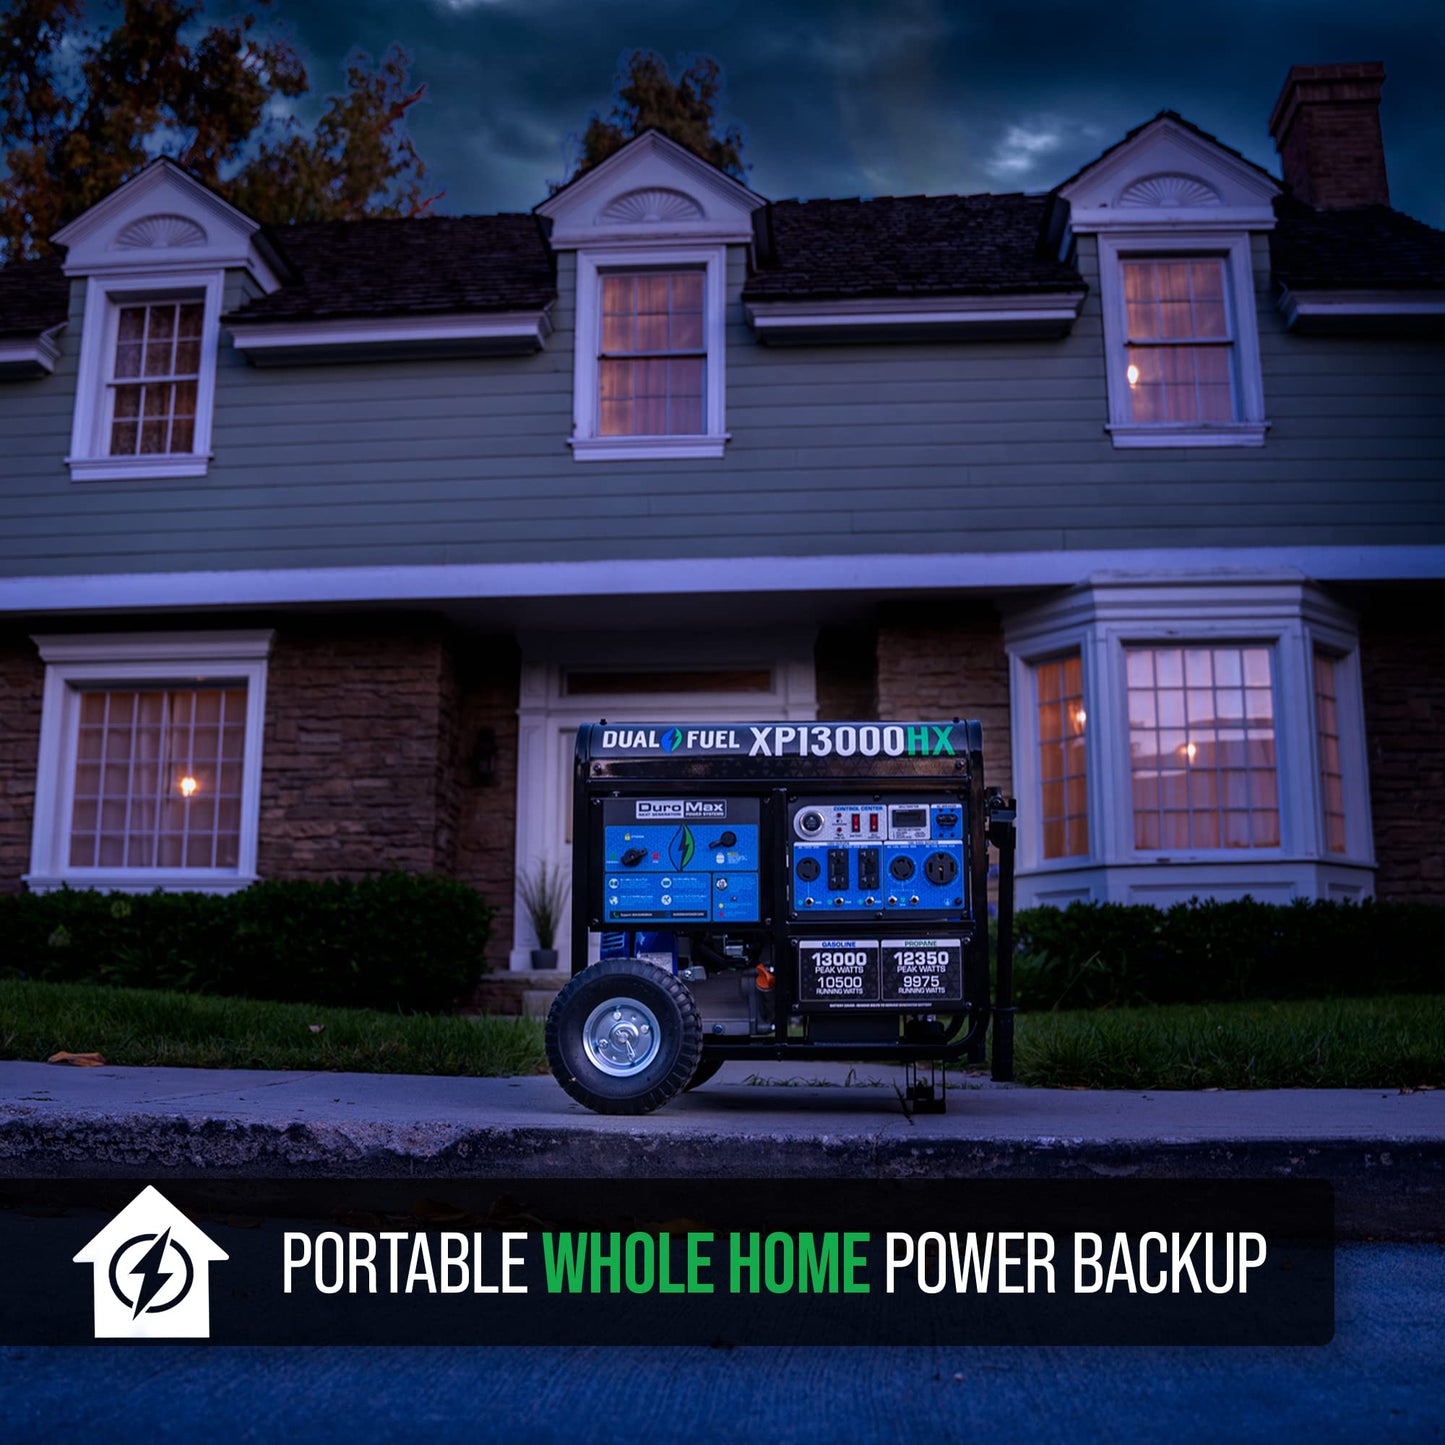 DuroMax XP13000HX Dual Fuel Portable Generator - 13000 Watt Gas or Propane Powered with Electric Start